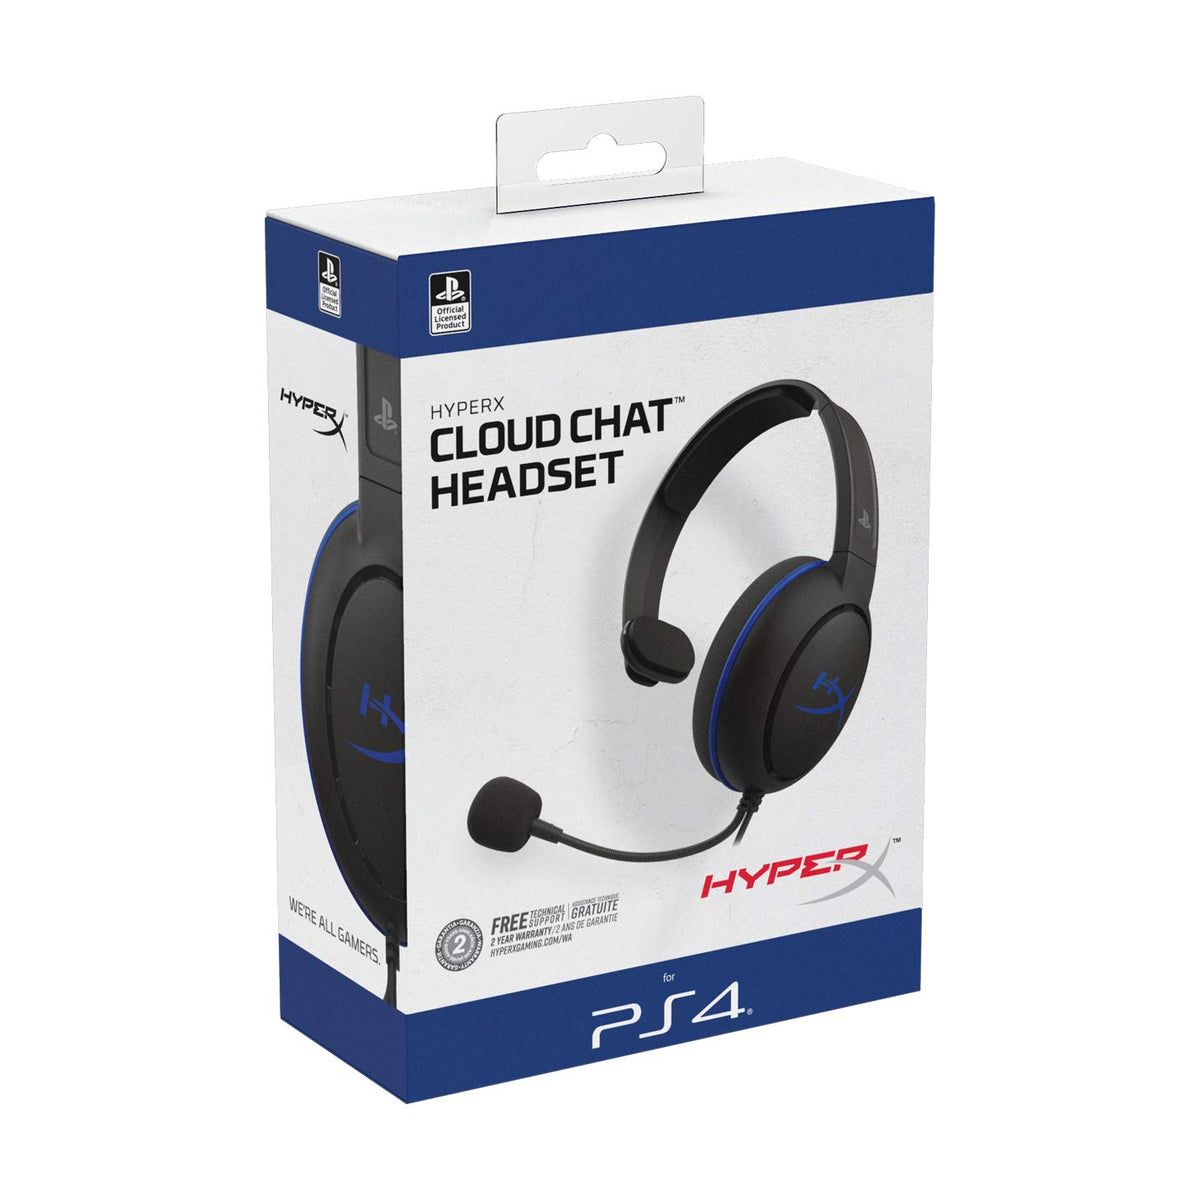 HYPERX PS4 Licensed Cloud Chat Headset